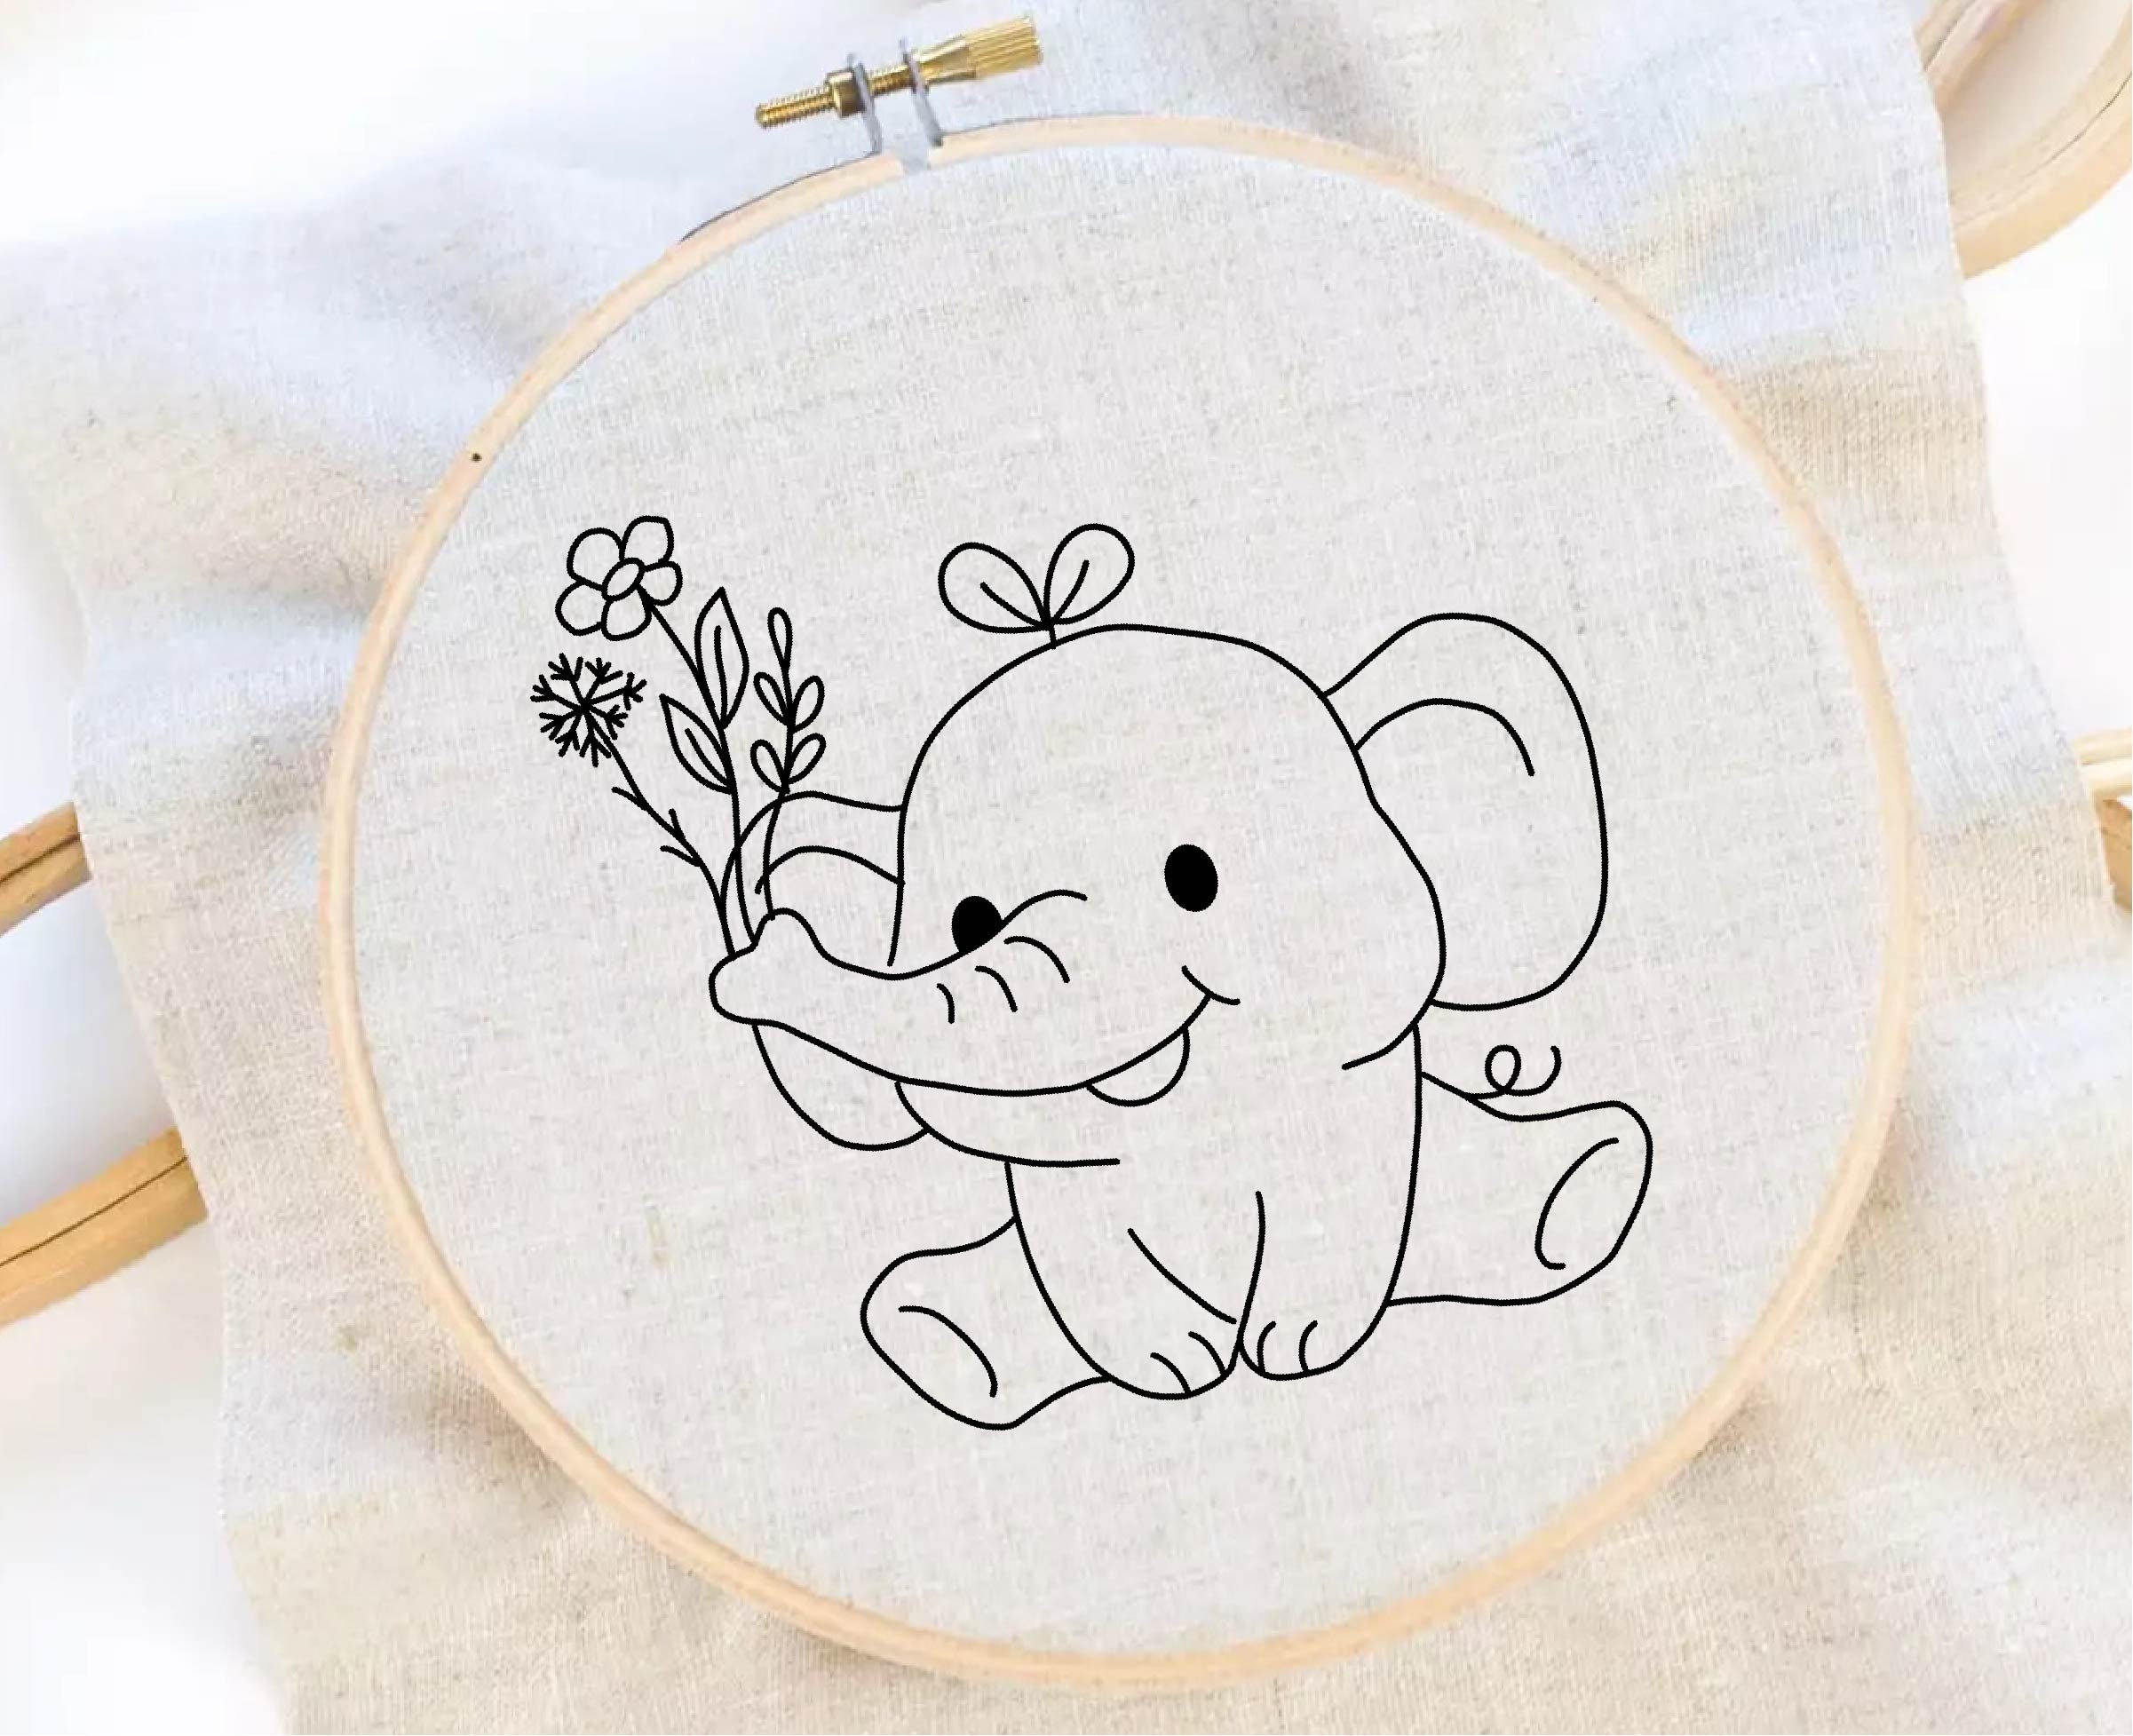 Learn 30 Stitches Elephant Embroidery kit for Beginners embroidery